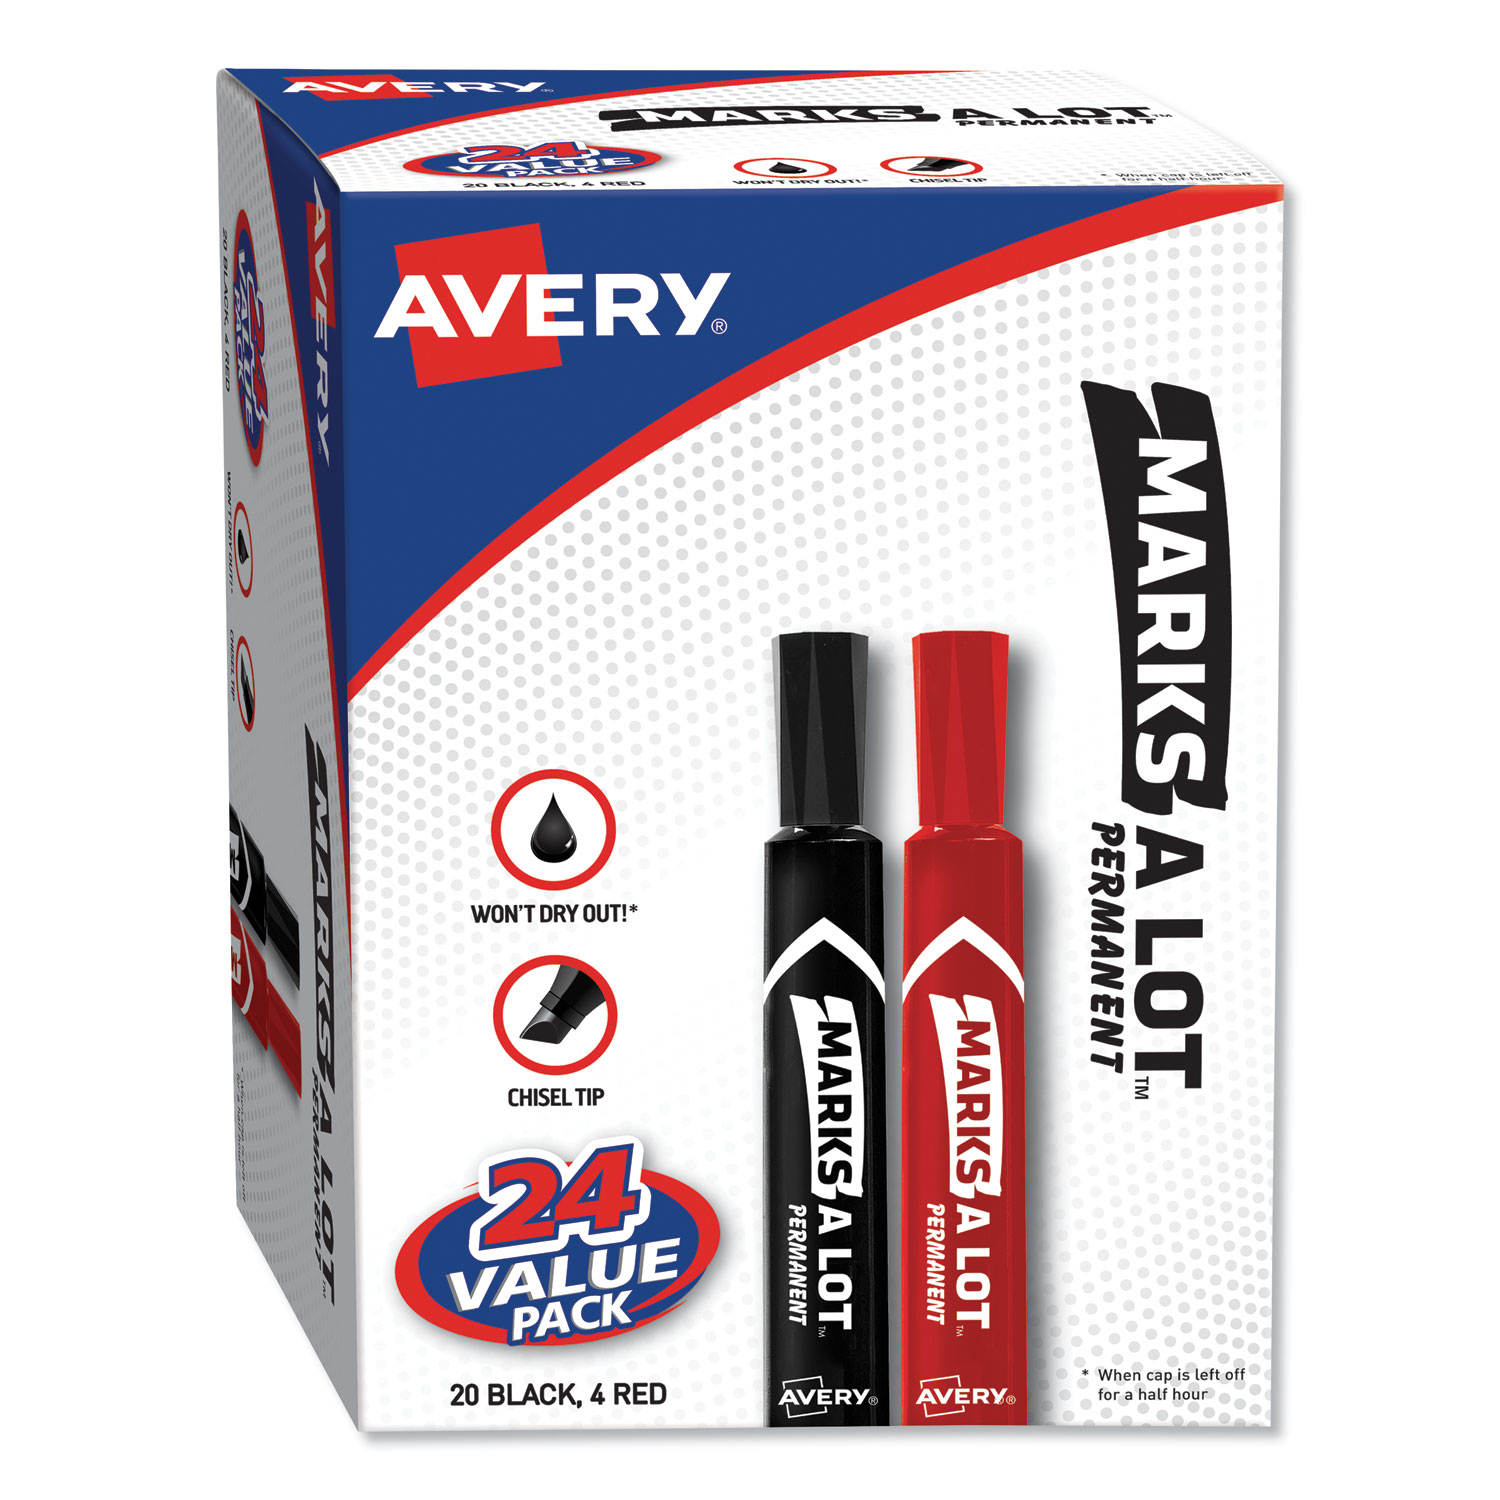  Avery 98088 MARKS A LOT Large Desk-Style Permanent Marker Value Pack, Broad Chisel Tip, Assorted Colors, 24/Set (AVE98088) 